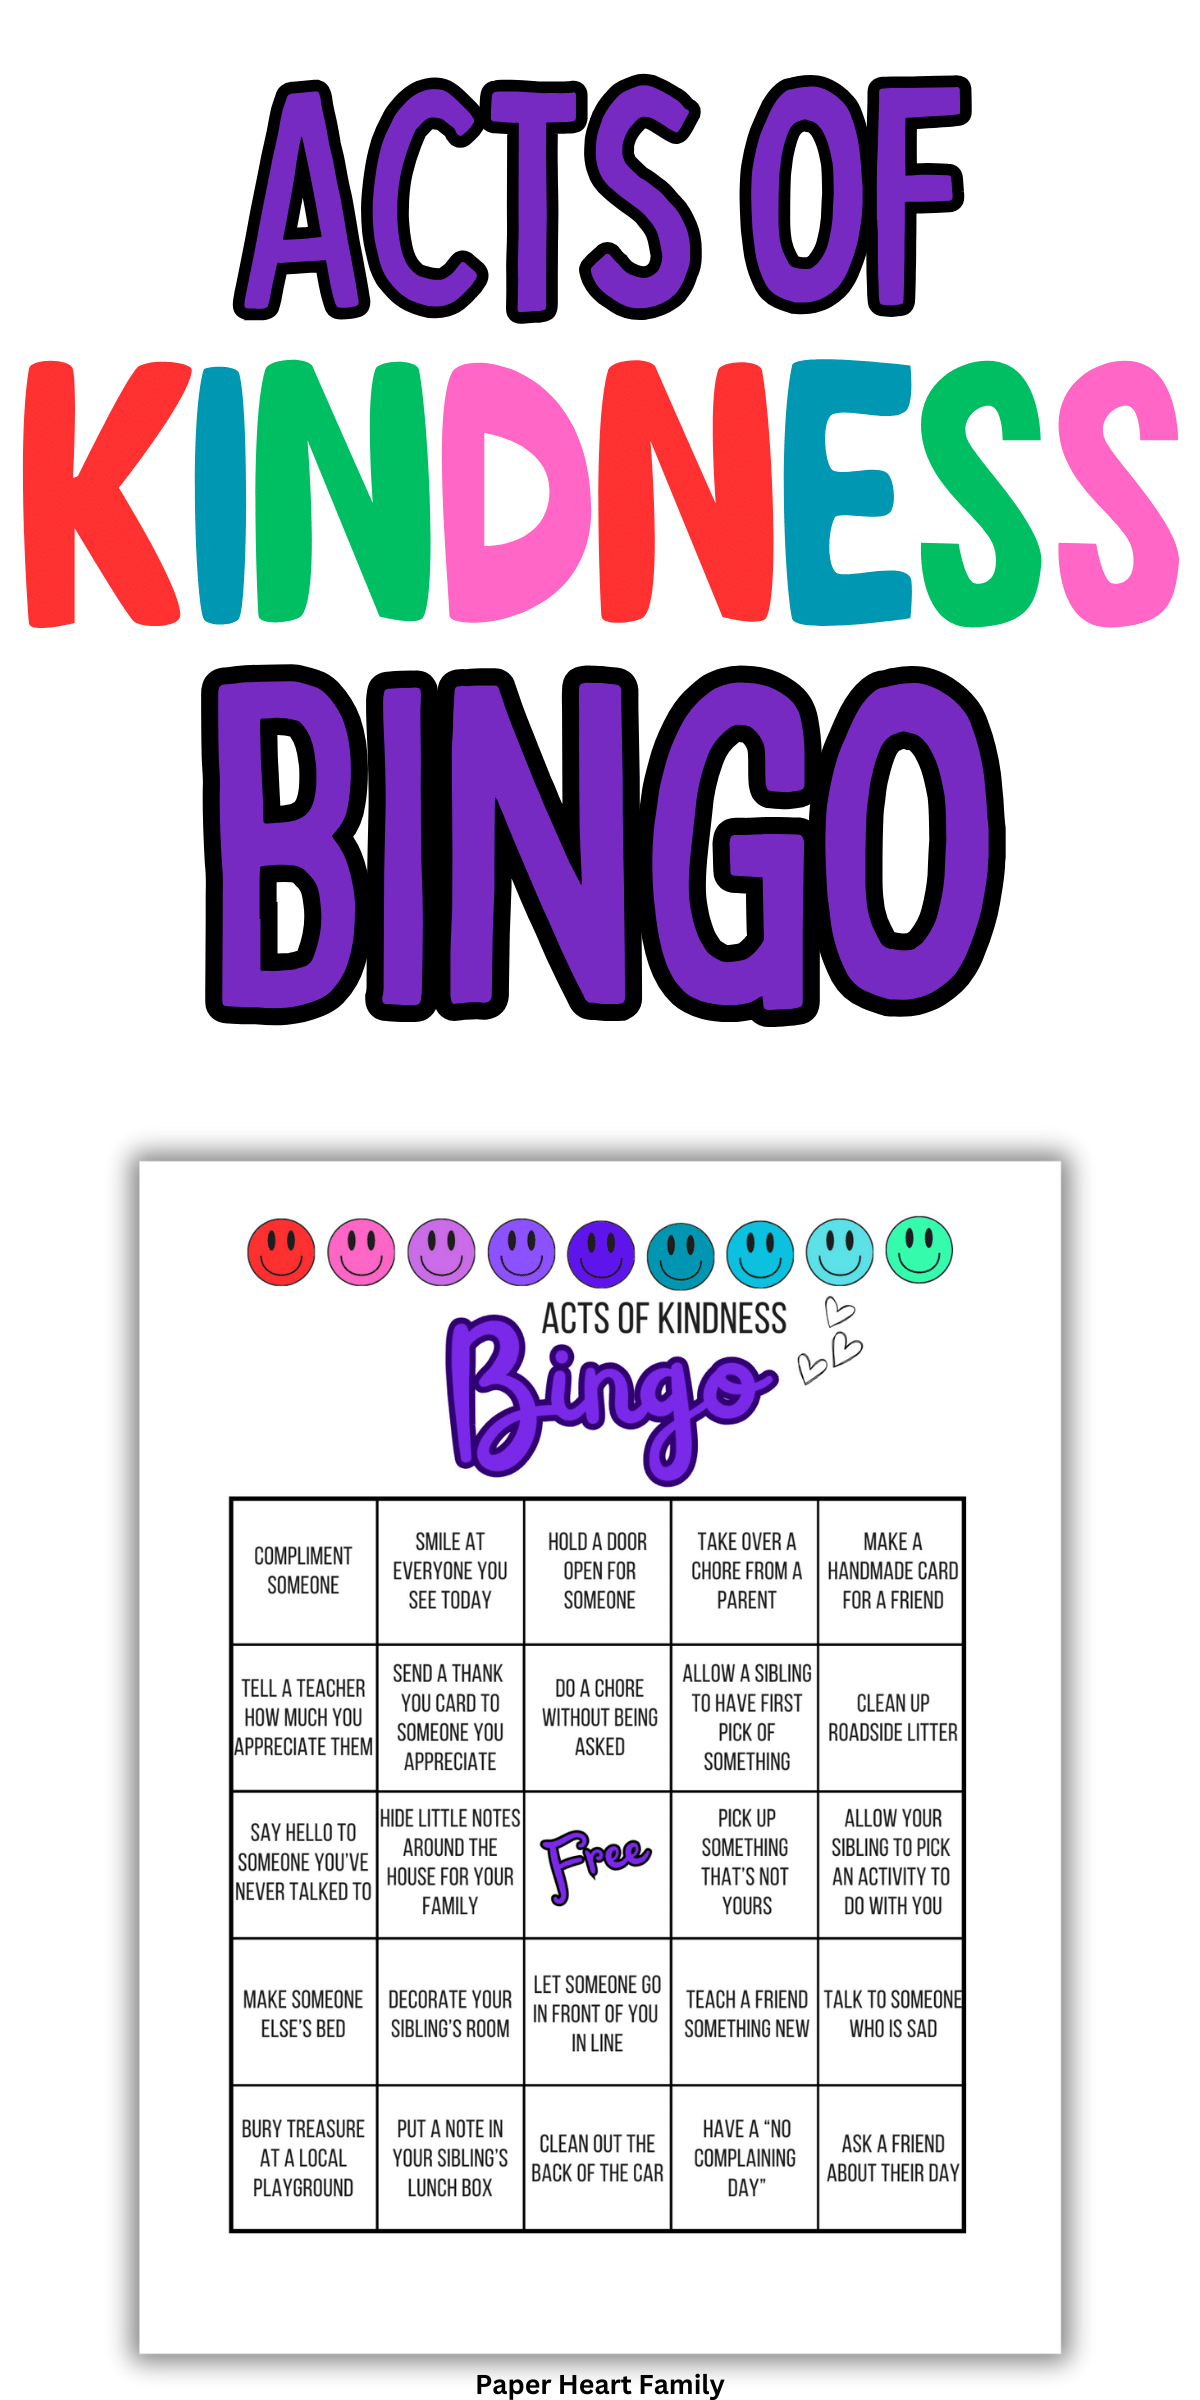 Acts of Kindness BINGO game for kids